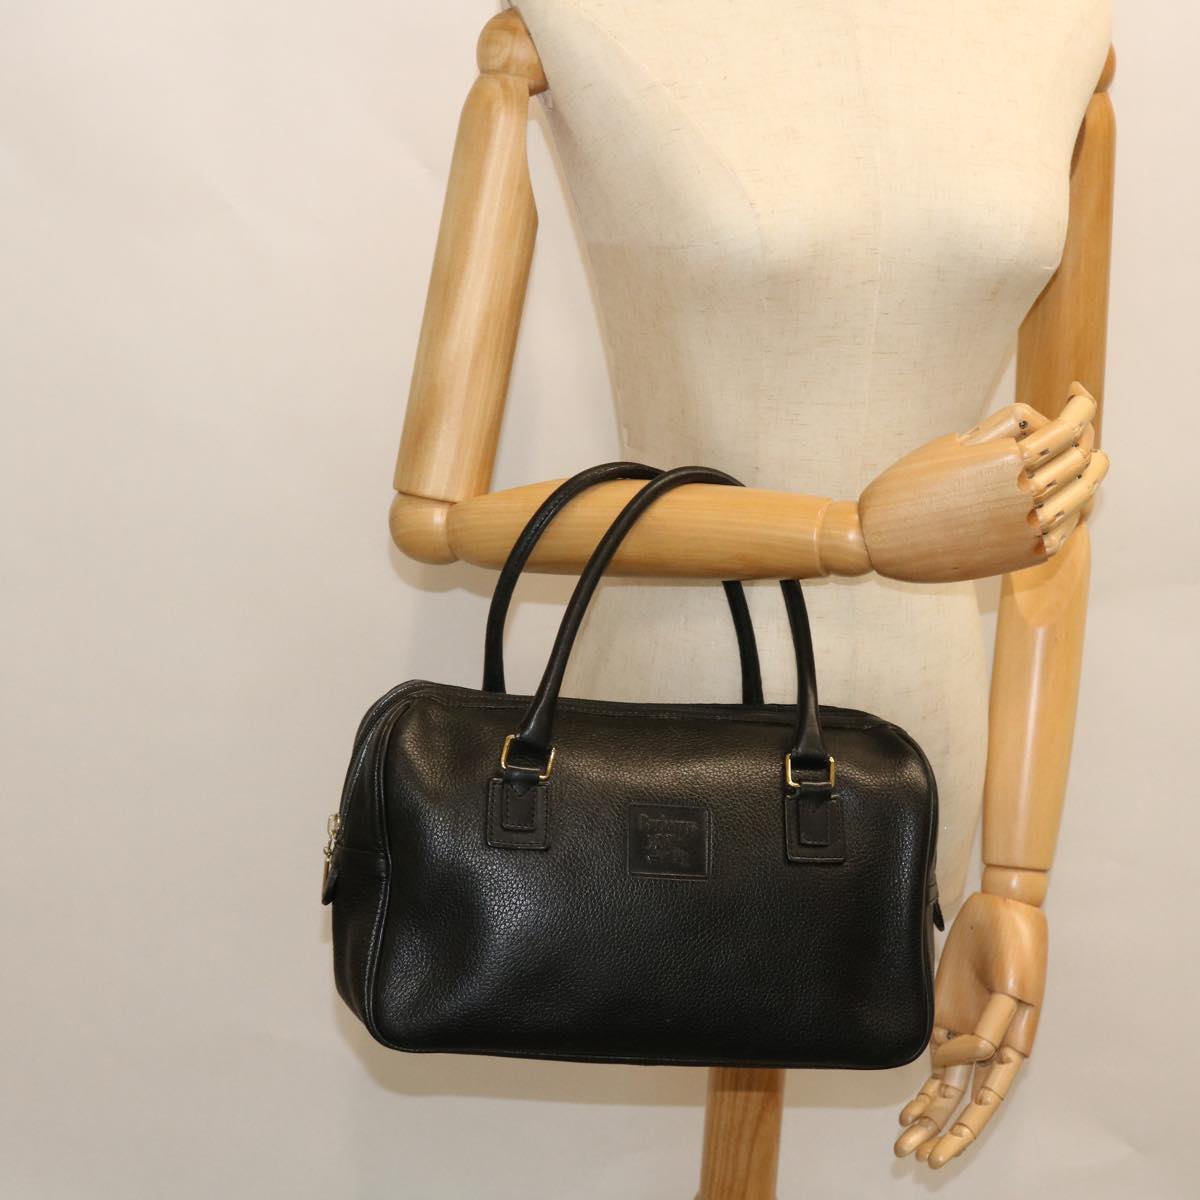 Burberrys Hand Bag Leather Black Auth bs7653